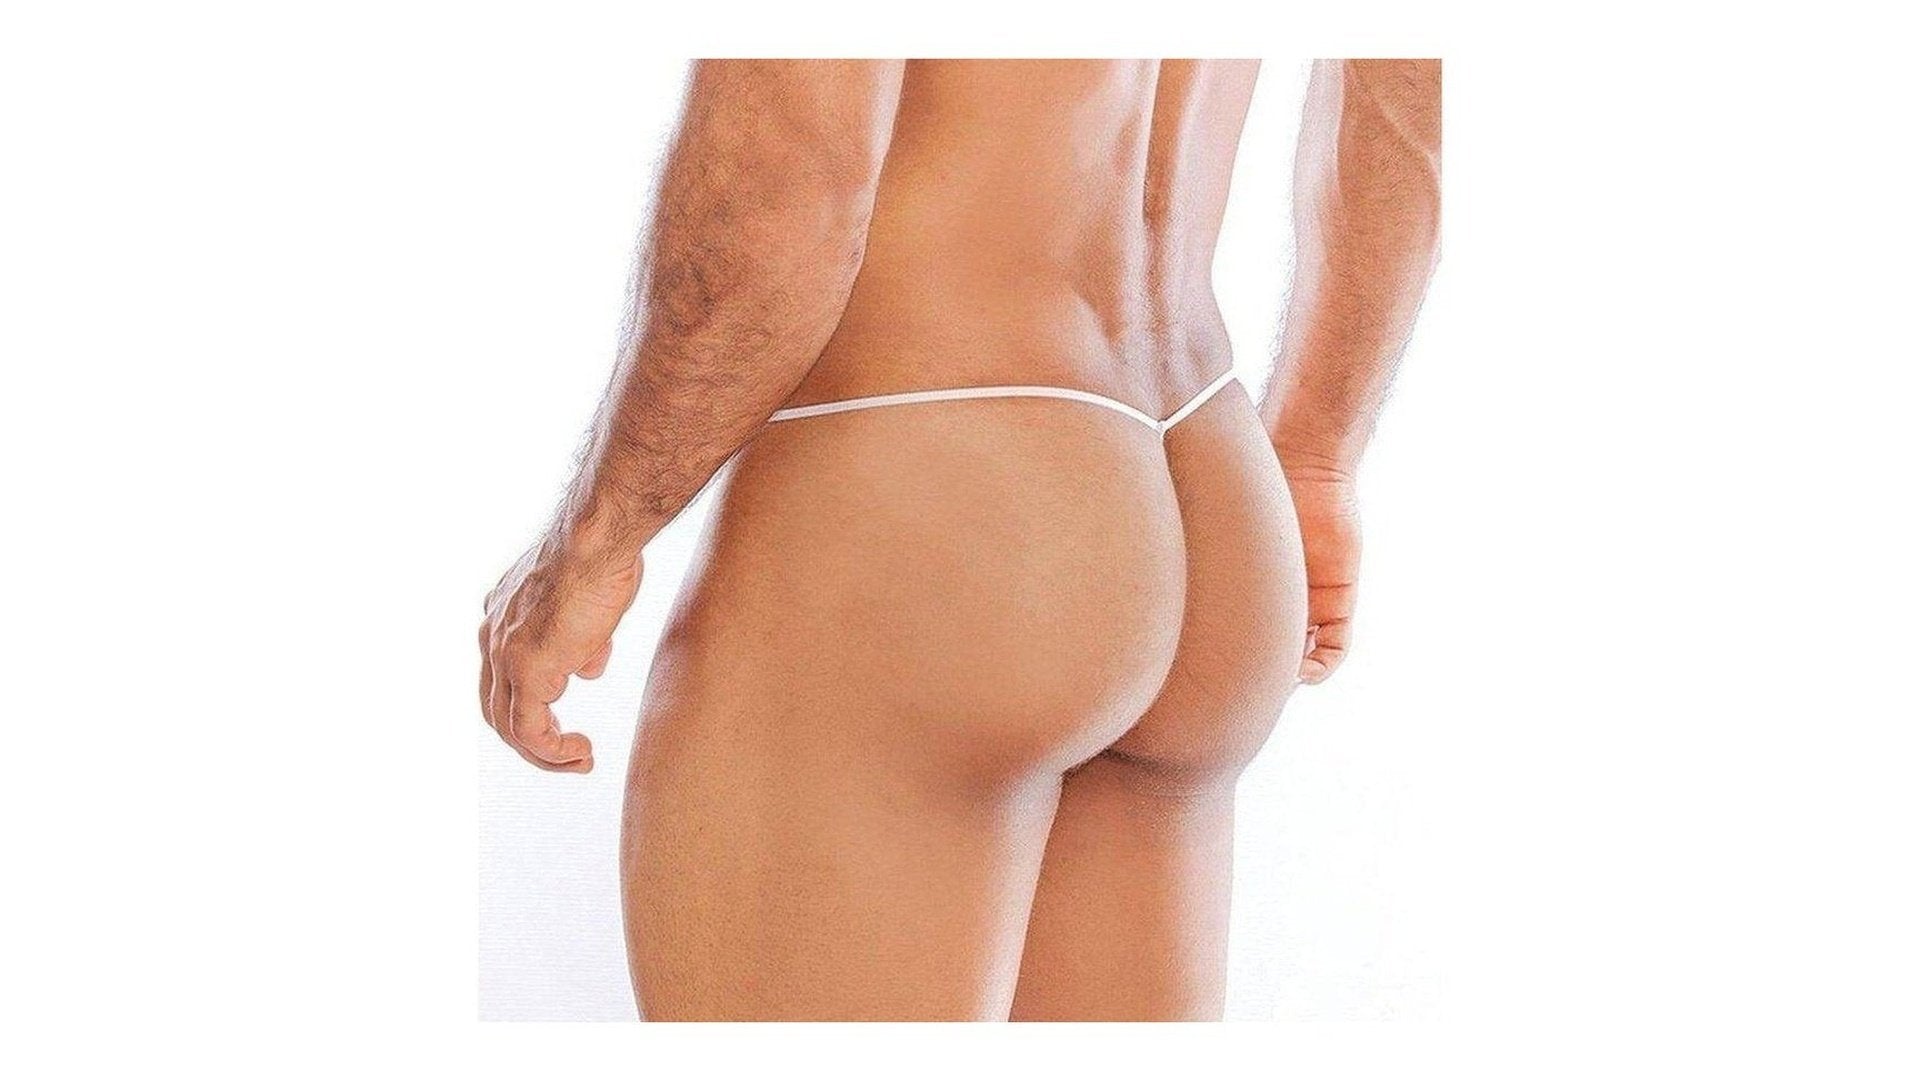 G-String or Thong? Pick Your Battle!